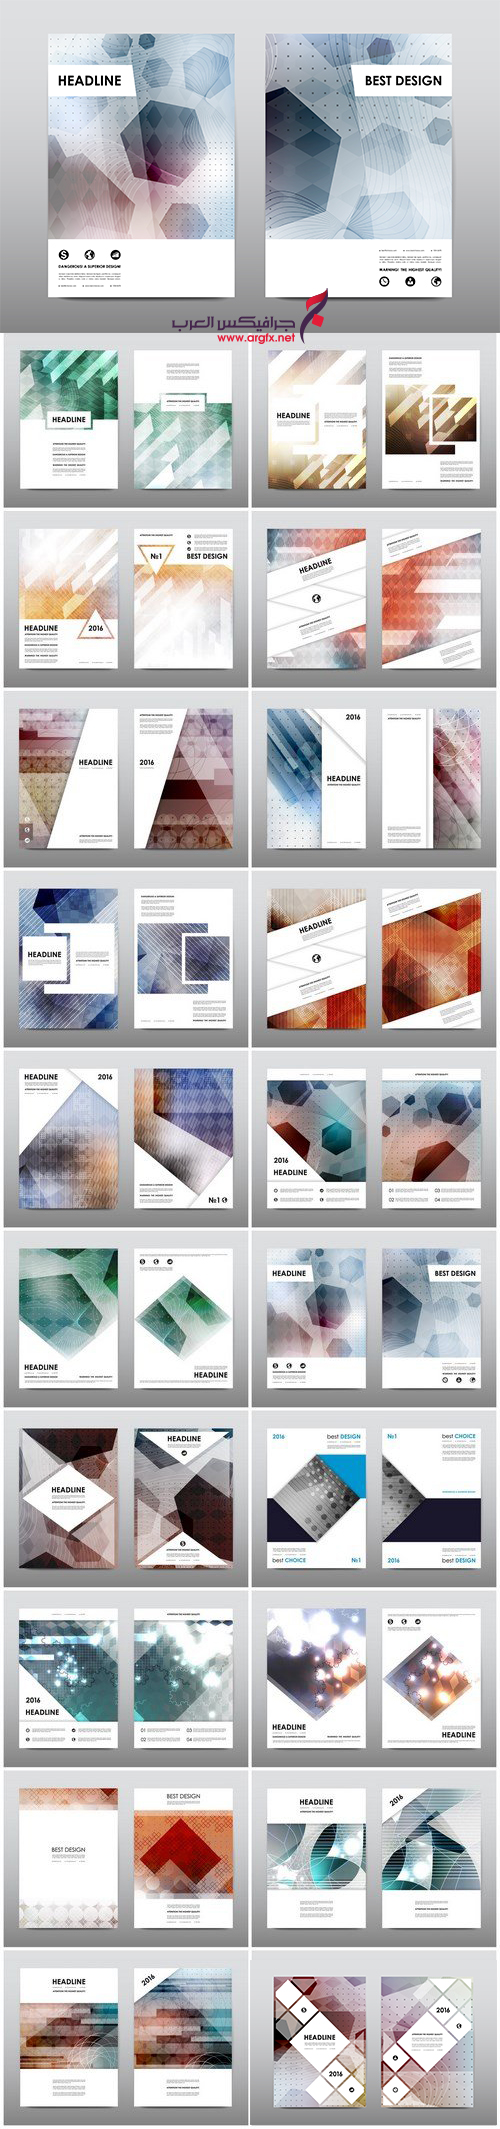 Magazine booklet cover, brochure layout template & abstract flyer design - 20xEPS Vector Stock